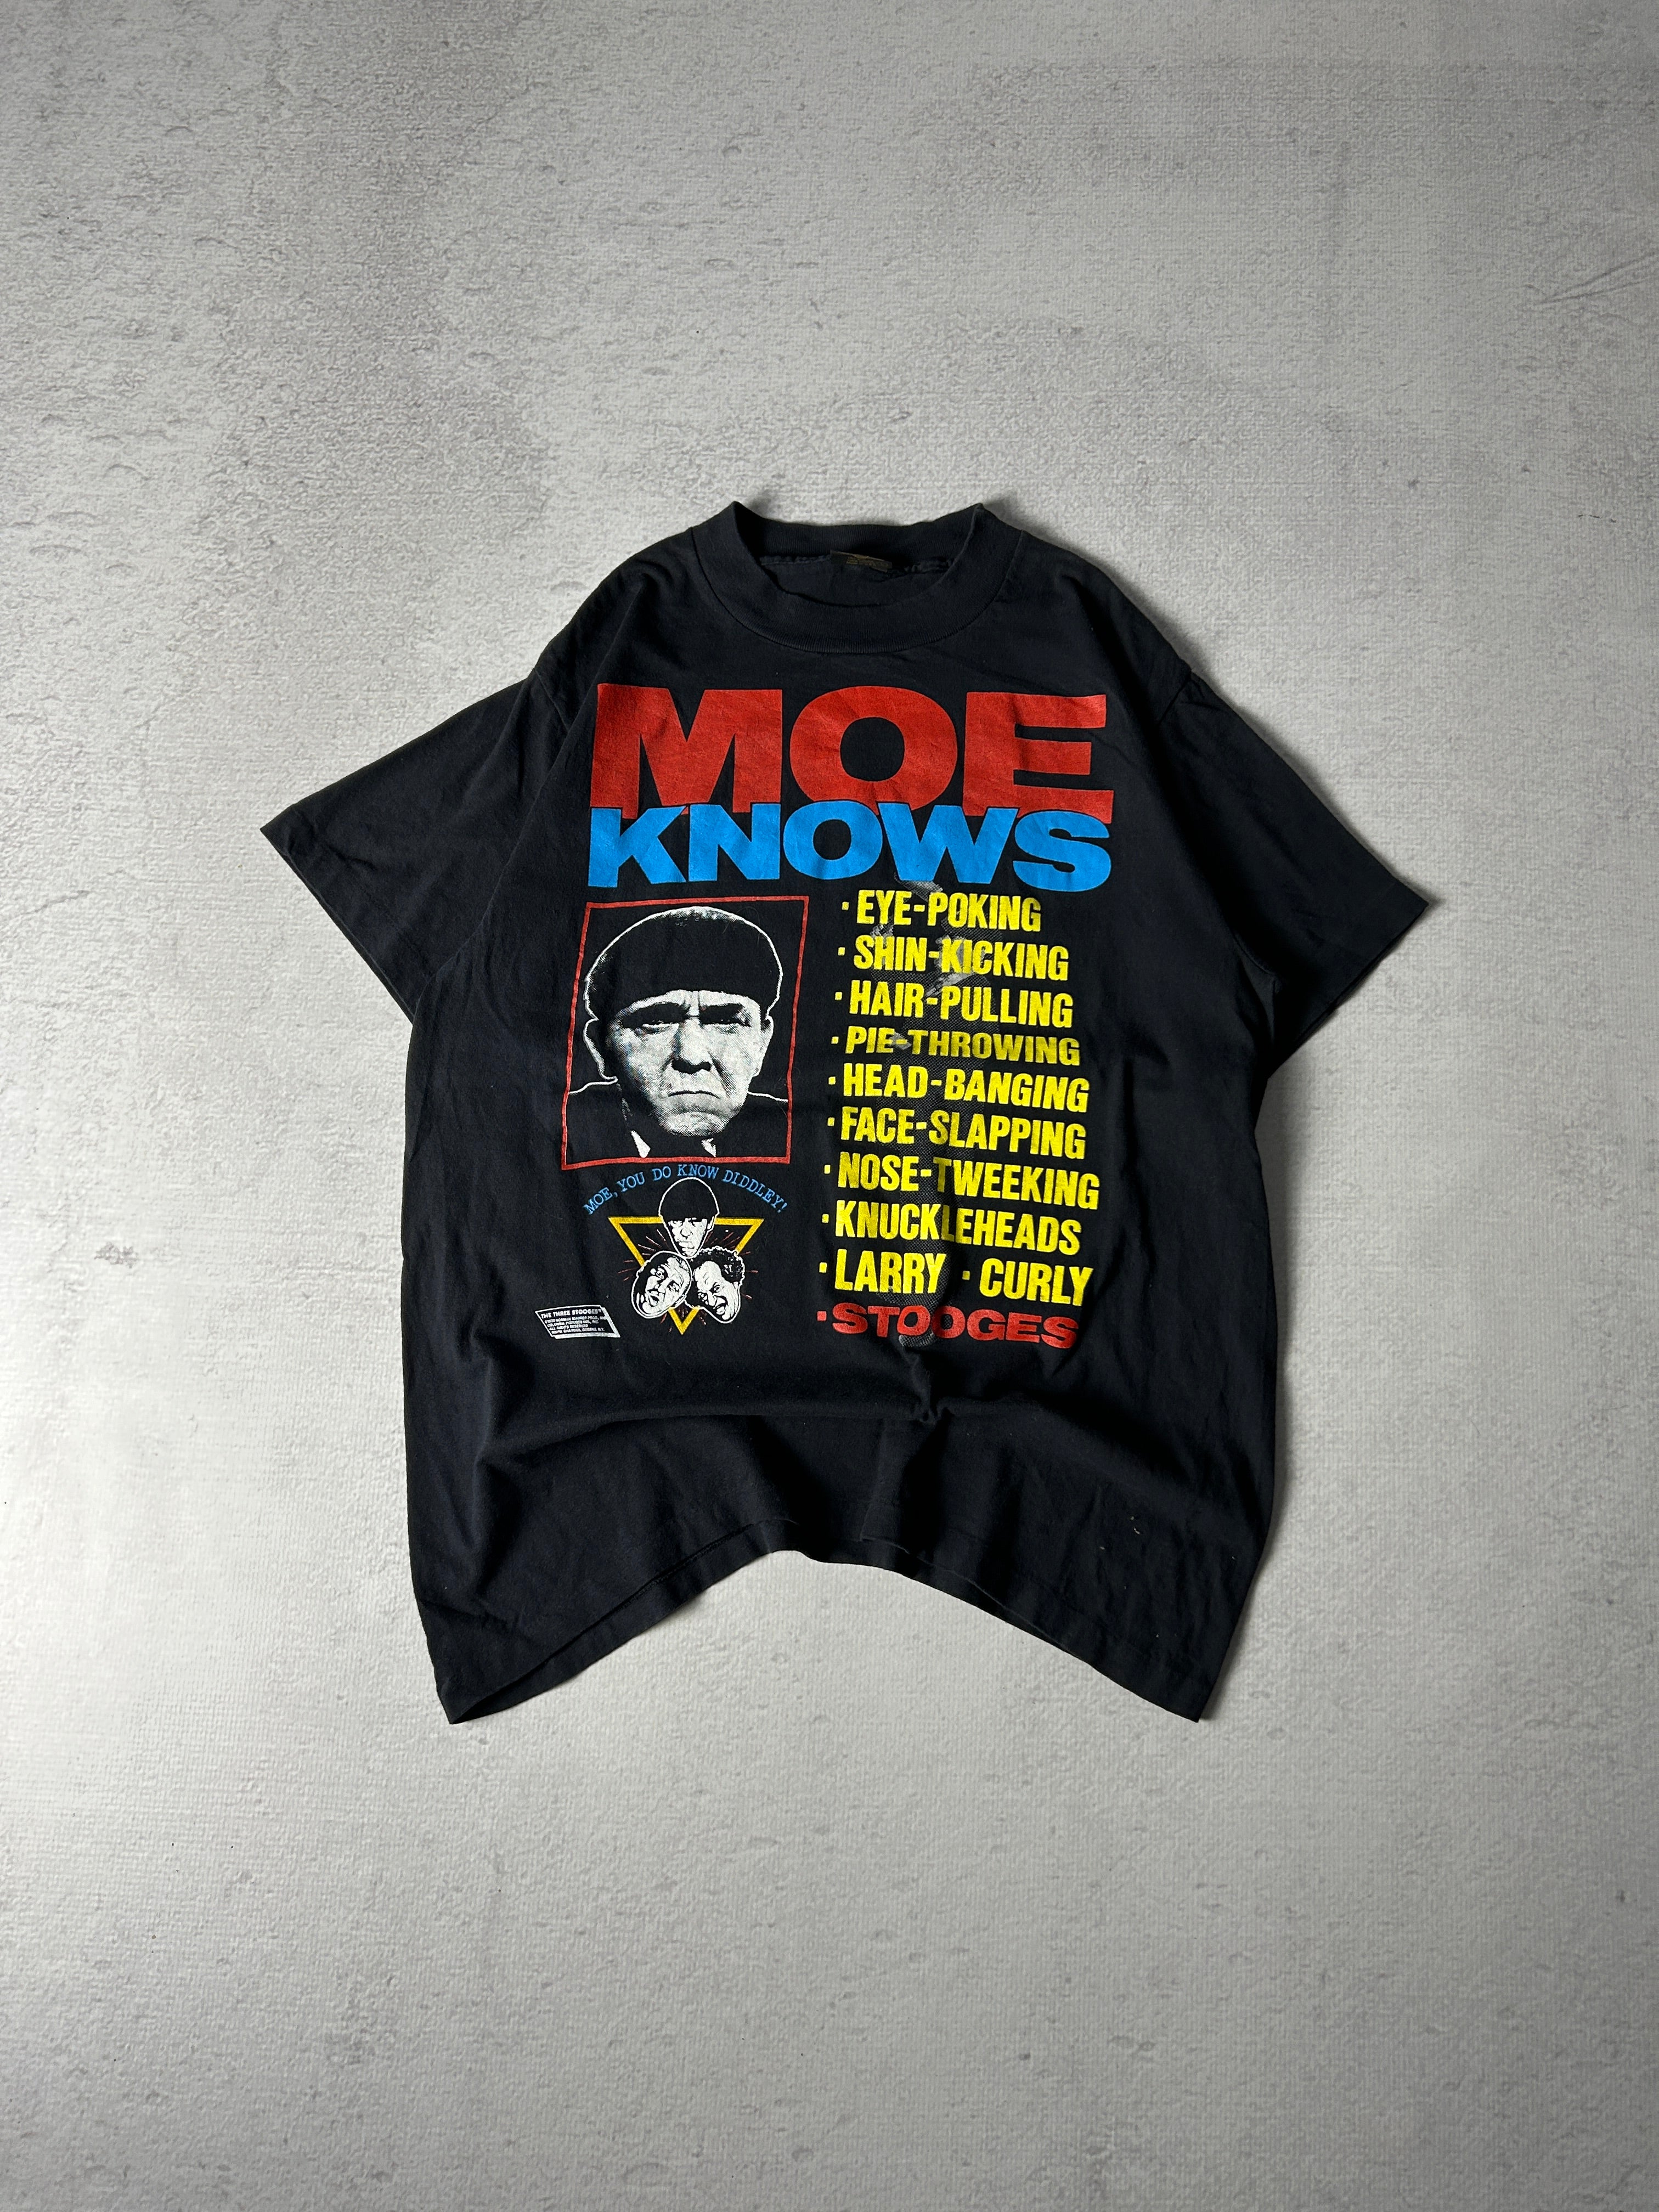 Vintage 1990 The Three Stooges 'Moe Knows' T-Shirt - Men's Large